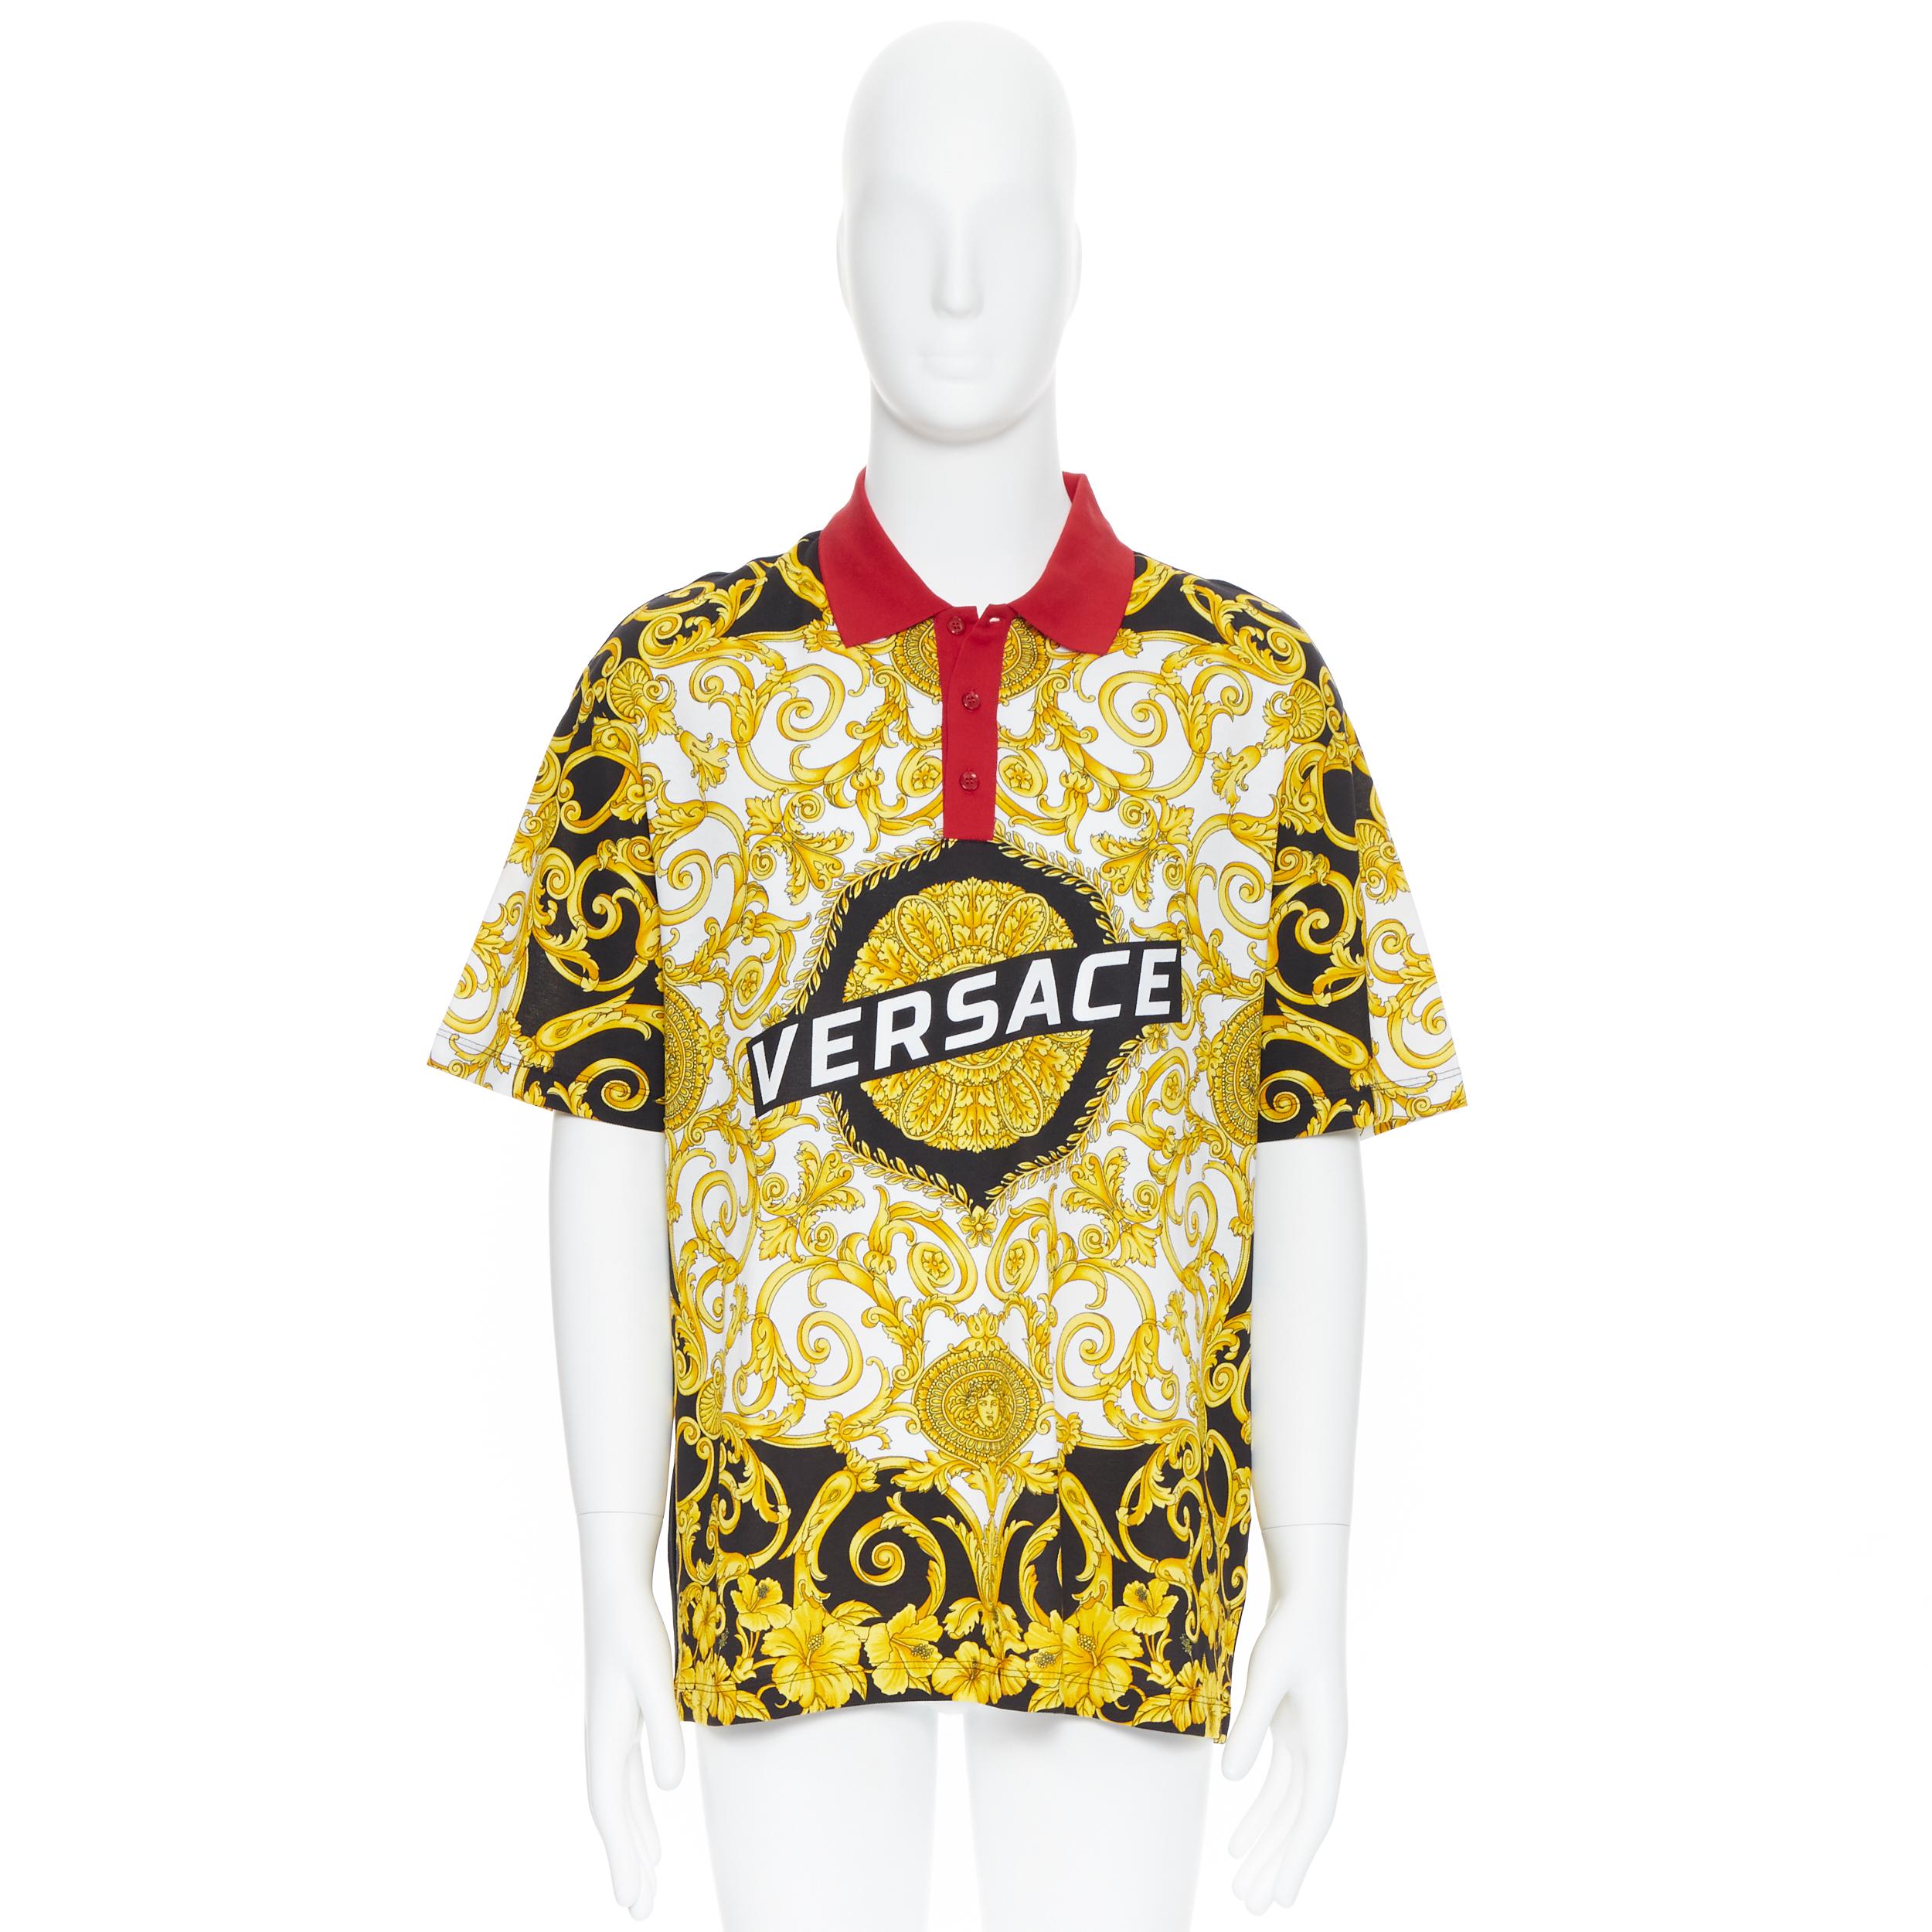 new VERSACE SS19 black gold baroque box logo Medusa print polo shirt top 4XL
Brand: Versace
Designer: Donatella Versace
Collection: SS19
Model Name / Style: Polo shurt
Material: Cotton
Color: Gold
Pattern: Floral
Closure: Button
Extra Detail: Red